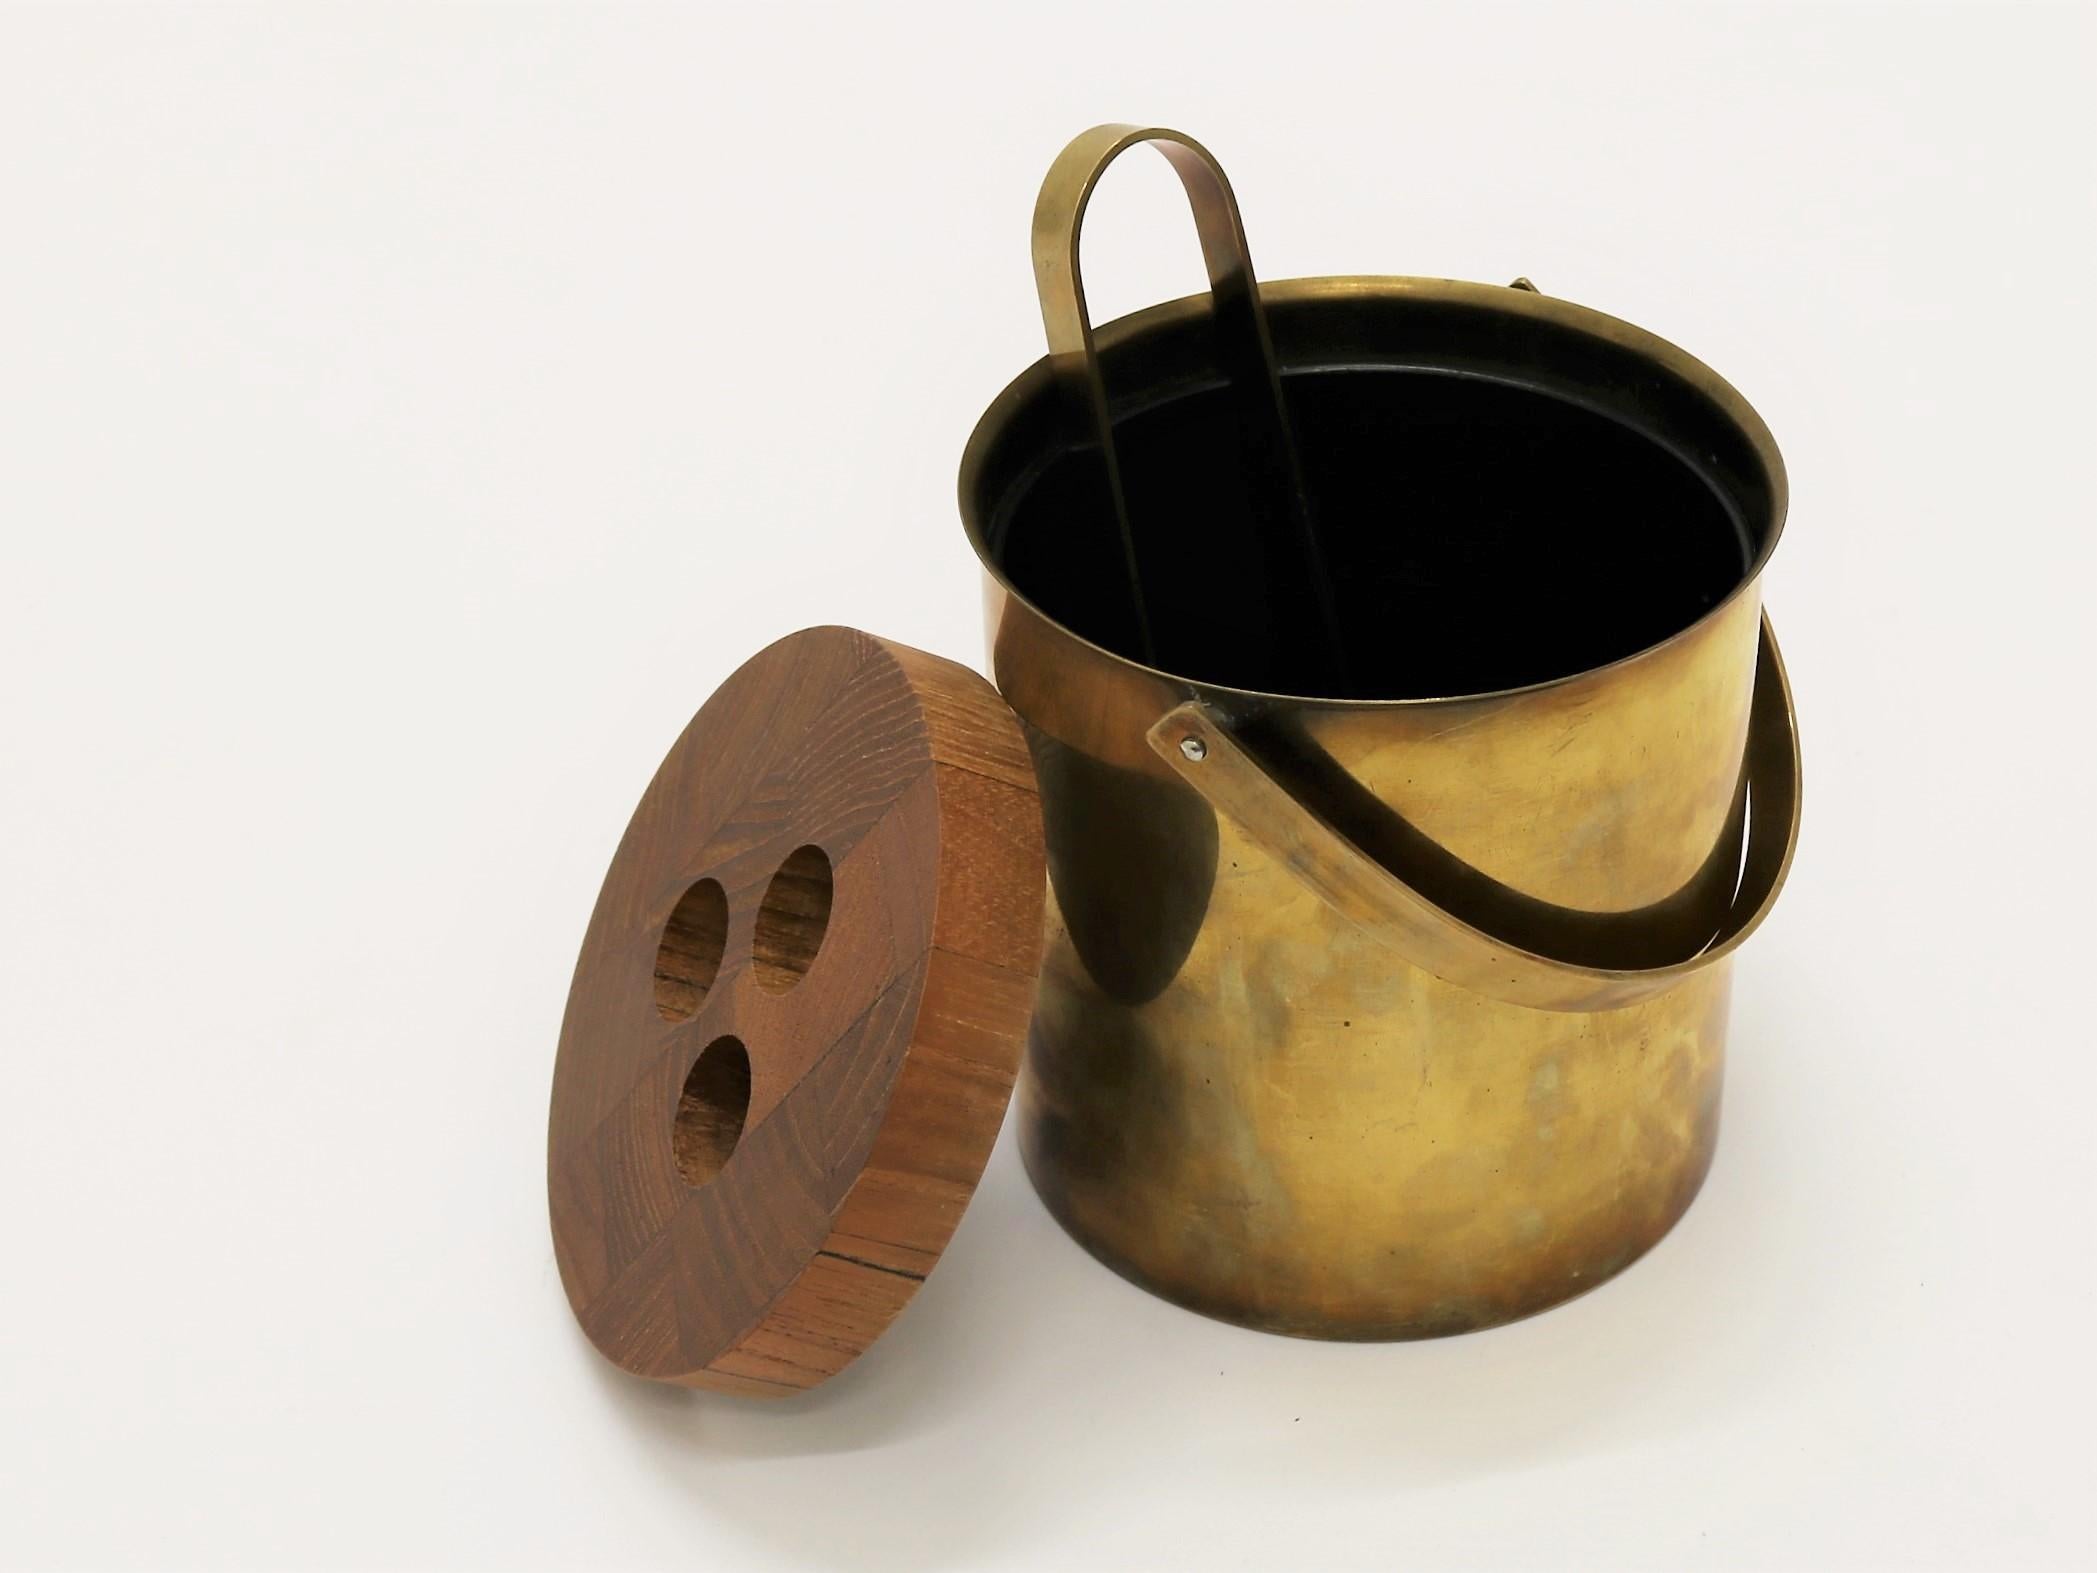 Set of brass ice bucket and tong by Arne Jacobsen for Stelton Brassware. The brassware line was only produced in a very limited amount in the mid 1960s and is today a sought after collectors item that you rarely find.
 